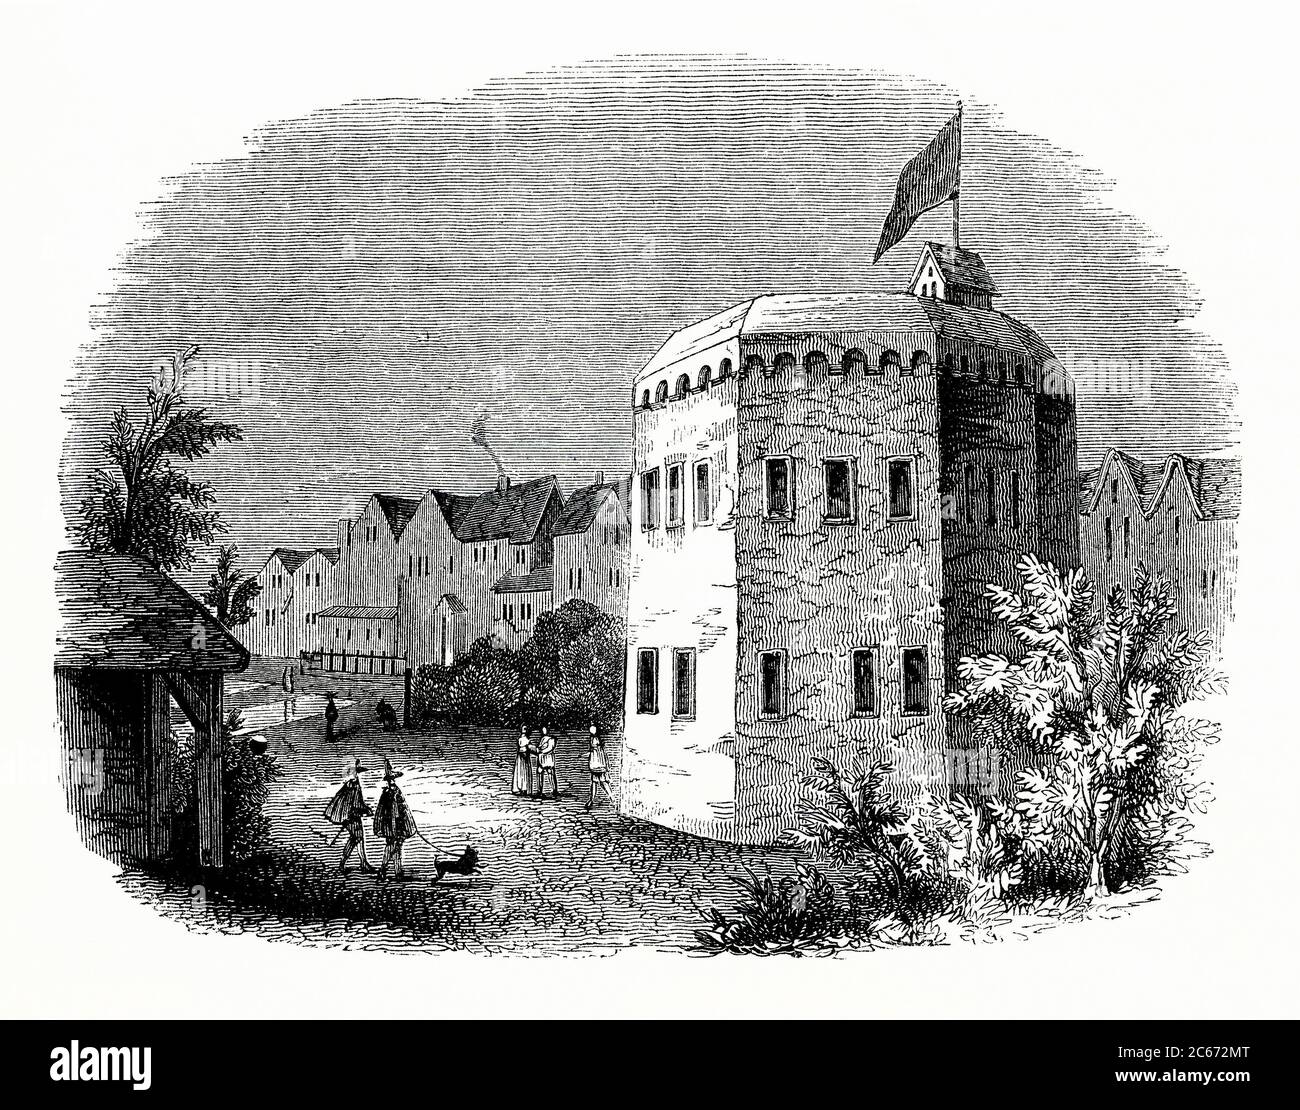 An old engraving of Paris Garden, Southwark, London, England, UK c 1600. The theatre is the Beargarden (or Bear Pit). It was used for bear-baiting, bull-baiting, and other 'entertainment' involving animals from the Elizabethan era to the English Restoration period. The Beargarden was a round or polygonal open structure, comparable to the theatres built in and around London from the mid-1500s. It was located in Bankside, across from the City of London on the south bank of the River Thames in Southwark. Stock Photo